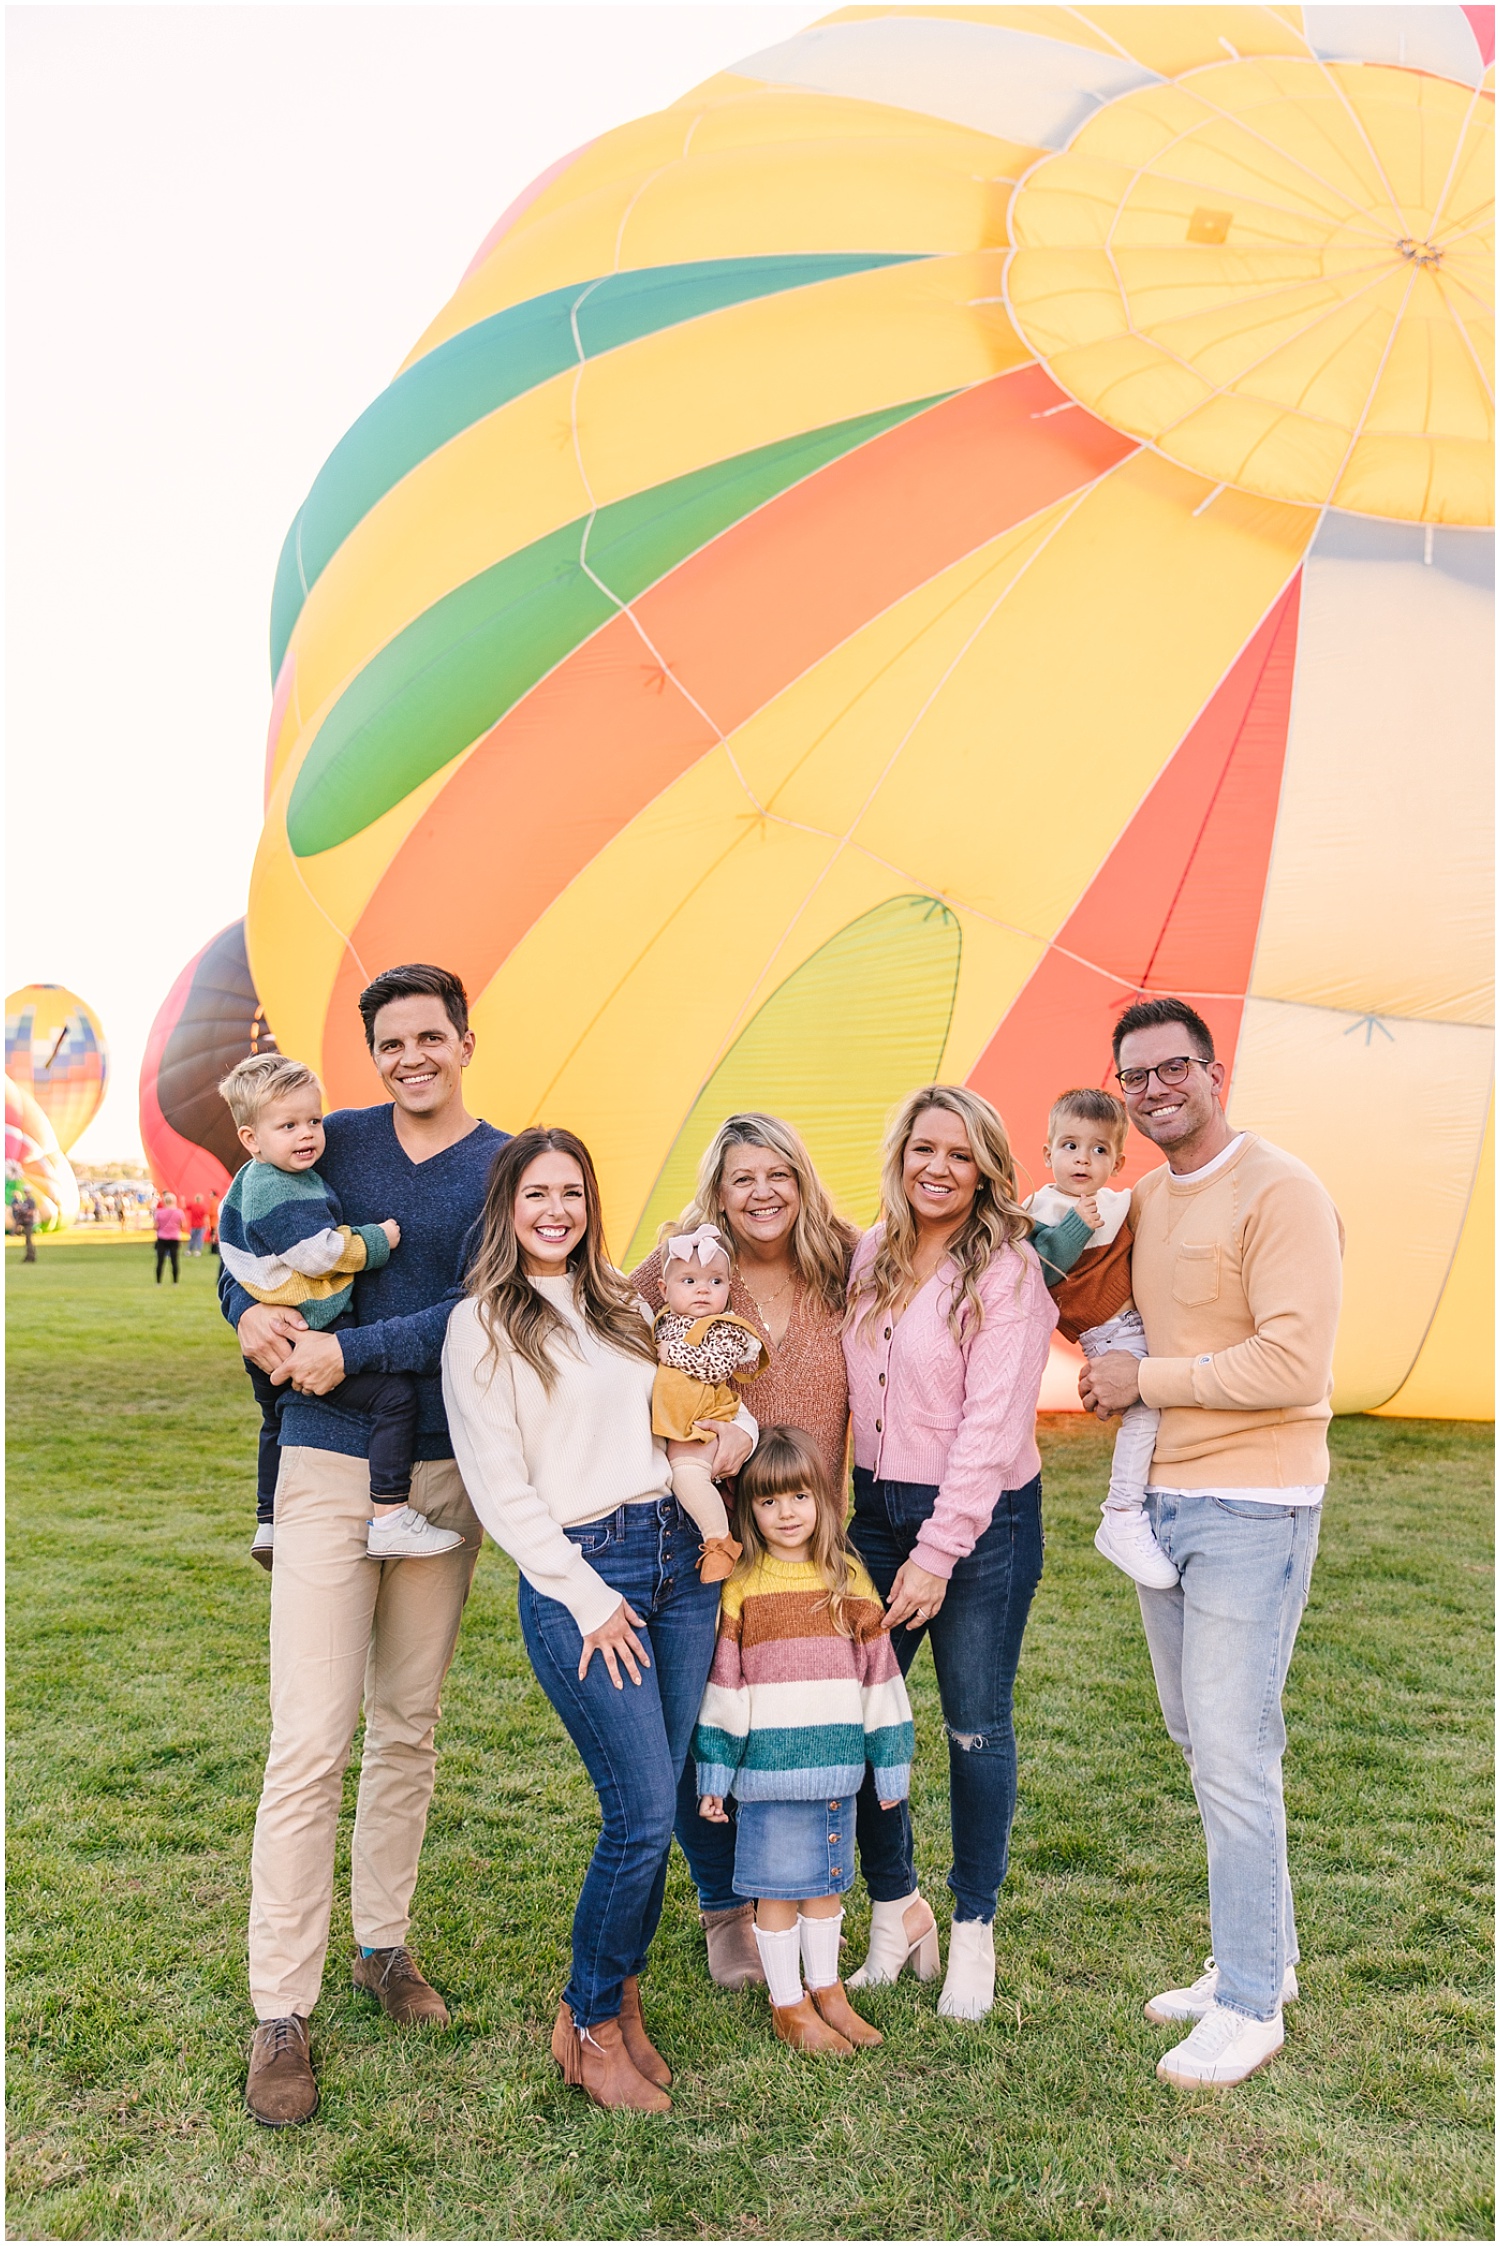 Professional family photography at the Albuquerque International Balloon Fiesta park during evening glow